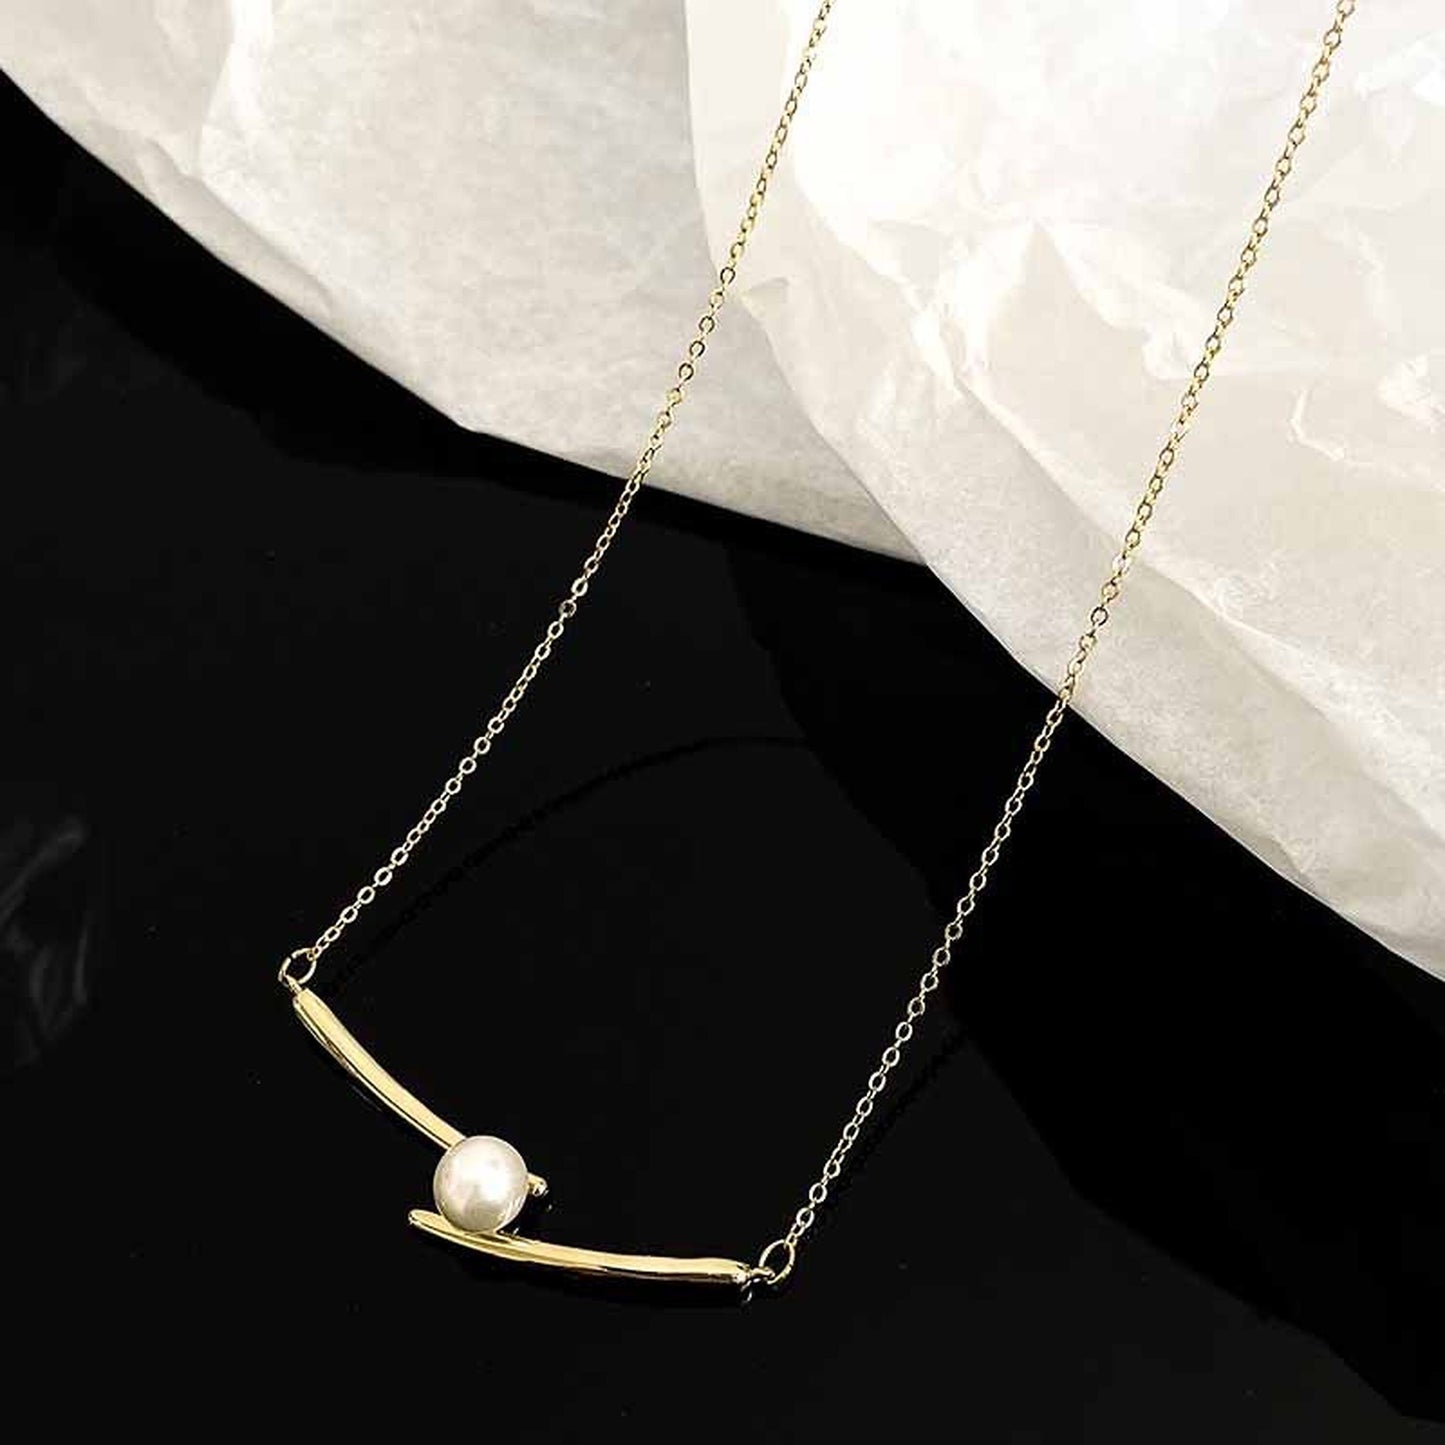 Mismatched Pearl Pendant Necklace, Gold Intersect Cross Necklace, Curved Bar Layering Necklace, Overlap Chain Necklace, Dainty jewelry Gift